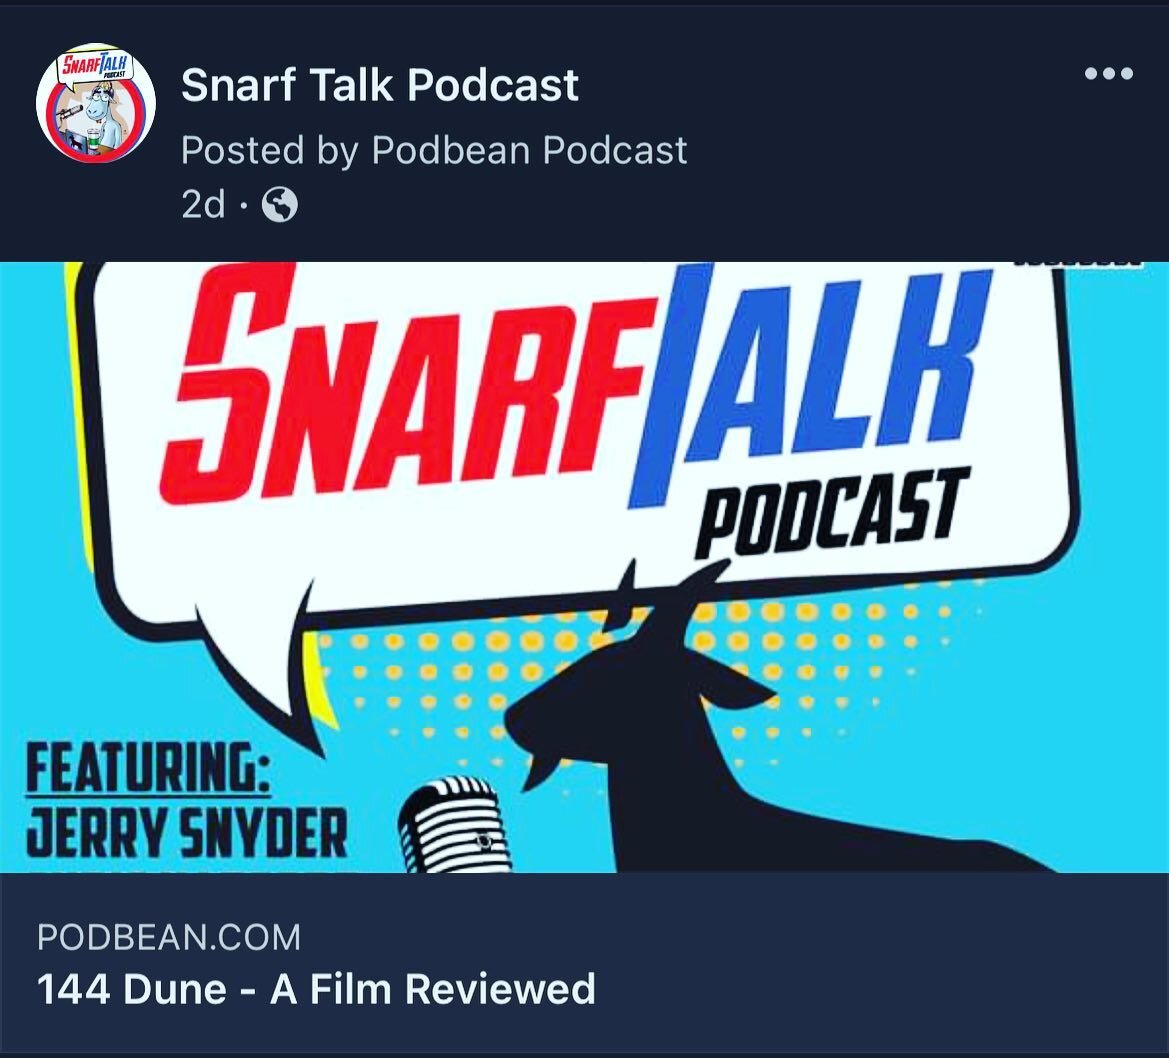 The newest episode of Snarf Talk is out!  Episode 144 our review of DUNE!! What an epic movie. #dune #dunemovie #timothychalamet #zendya #denisvilleneuve #imax #snarftalkpodcast #snarftalk #sundayfunday